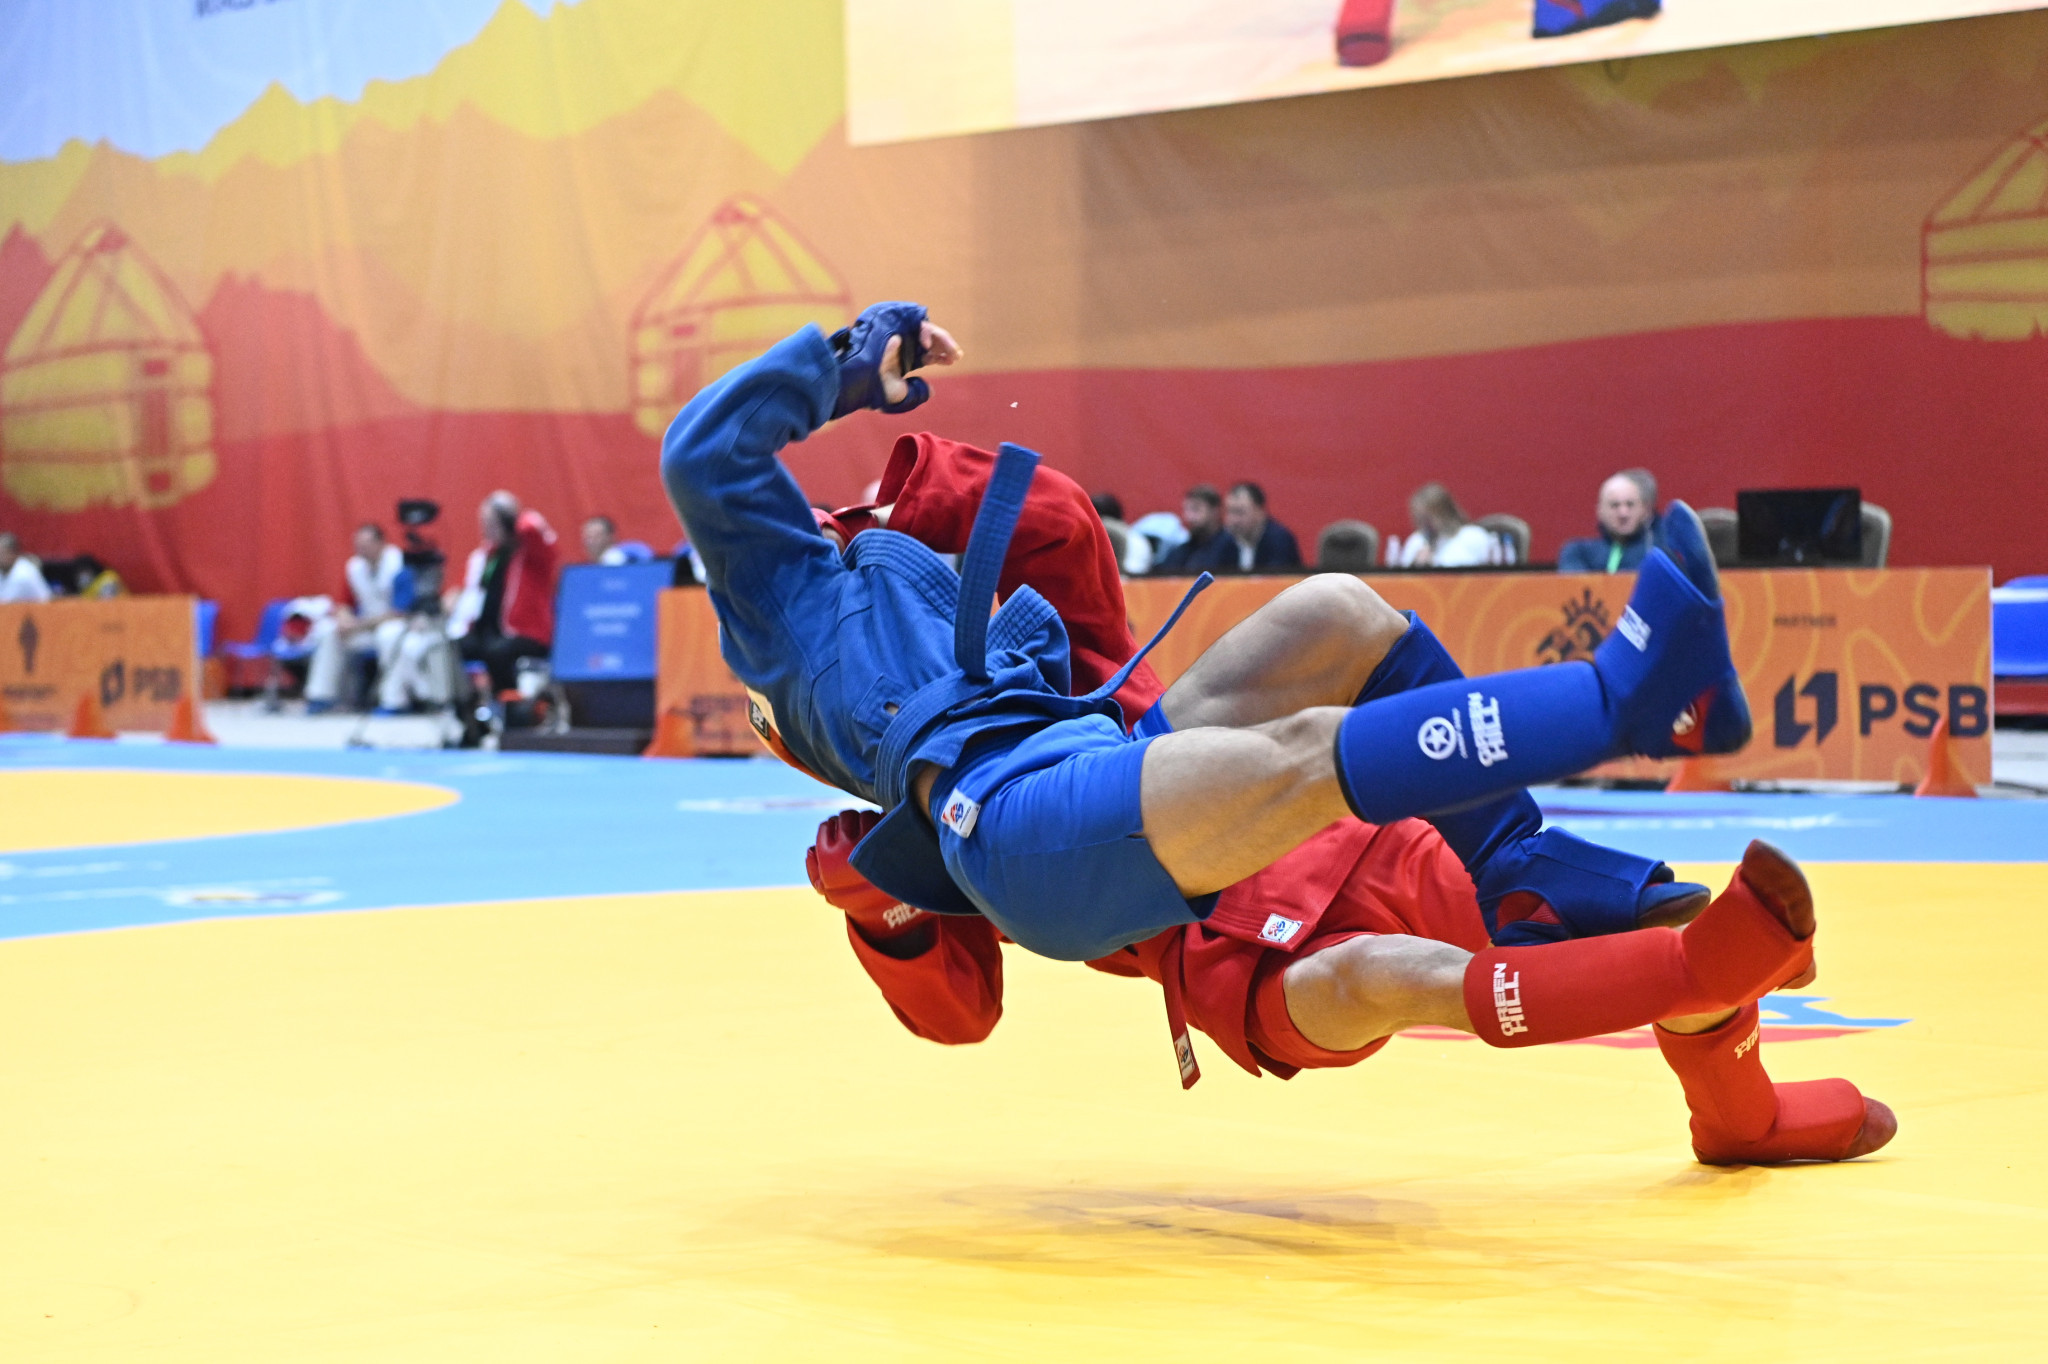 The World Sambo Championships is taking place in Kyrgyzstan for the first time ©FIAS